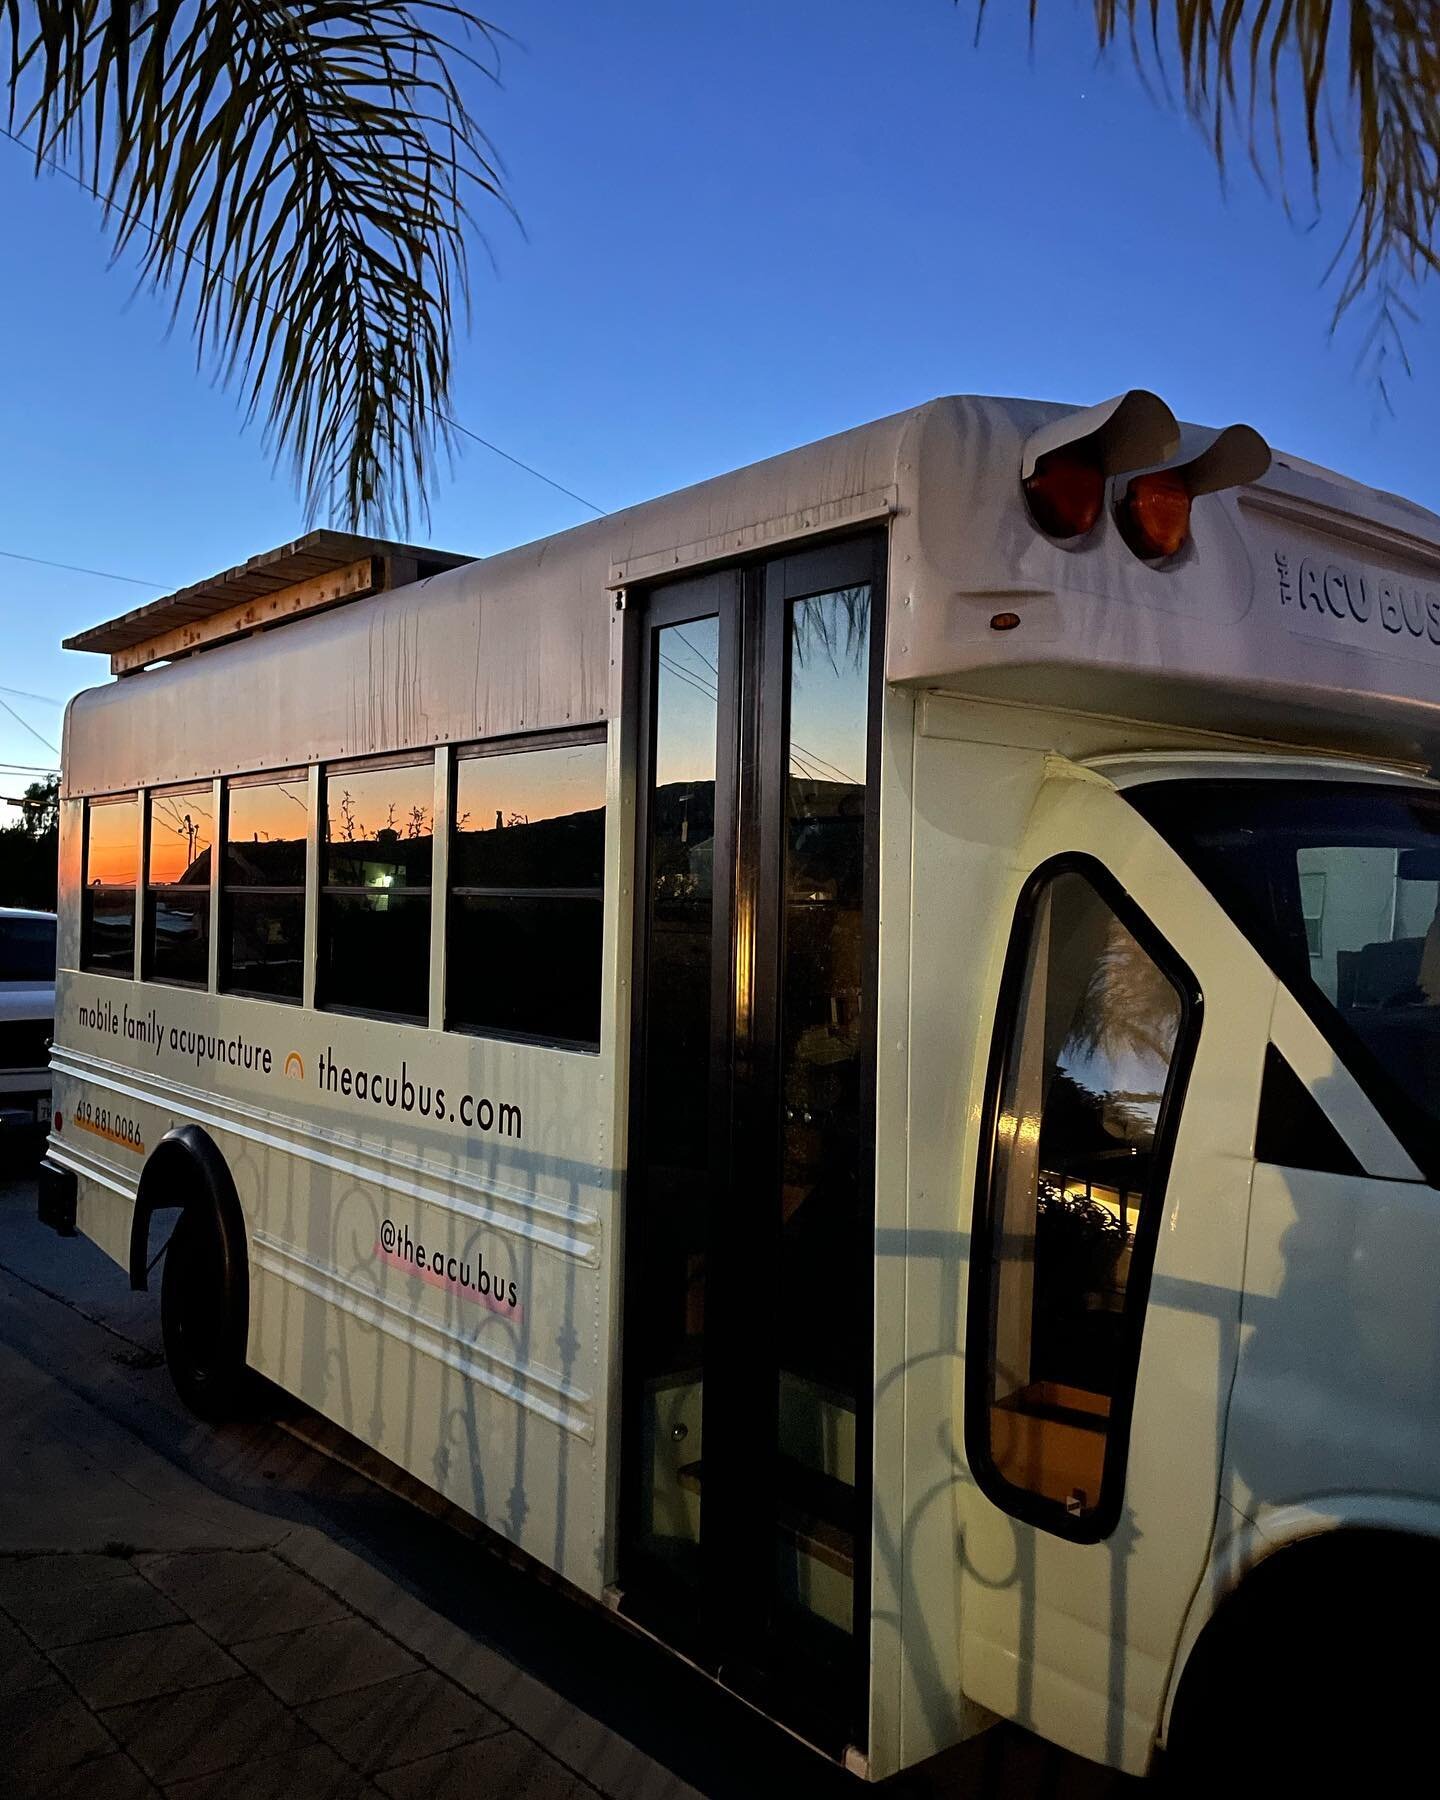 Little Busby and the sunset 🚌 🌅🌴 

#skoolie #nofilter #acupuncture #mobilefamilyacupuncture #sandiego #socalnights #busbuild